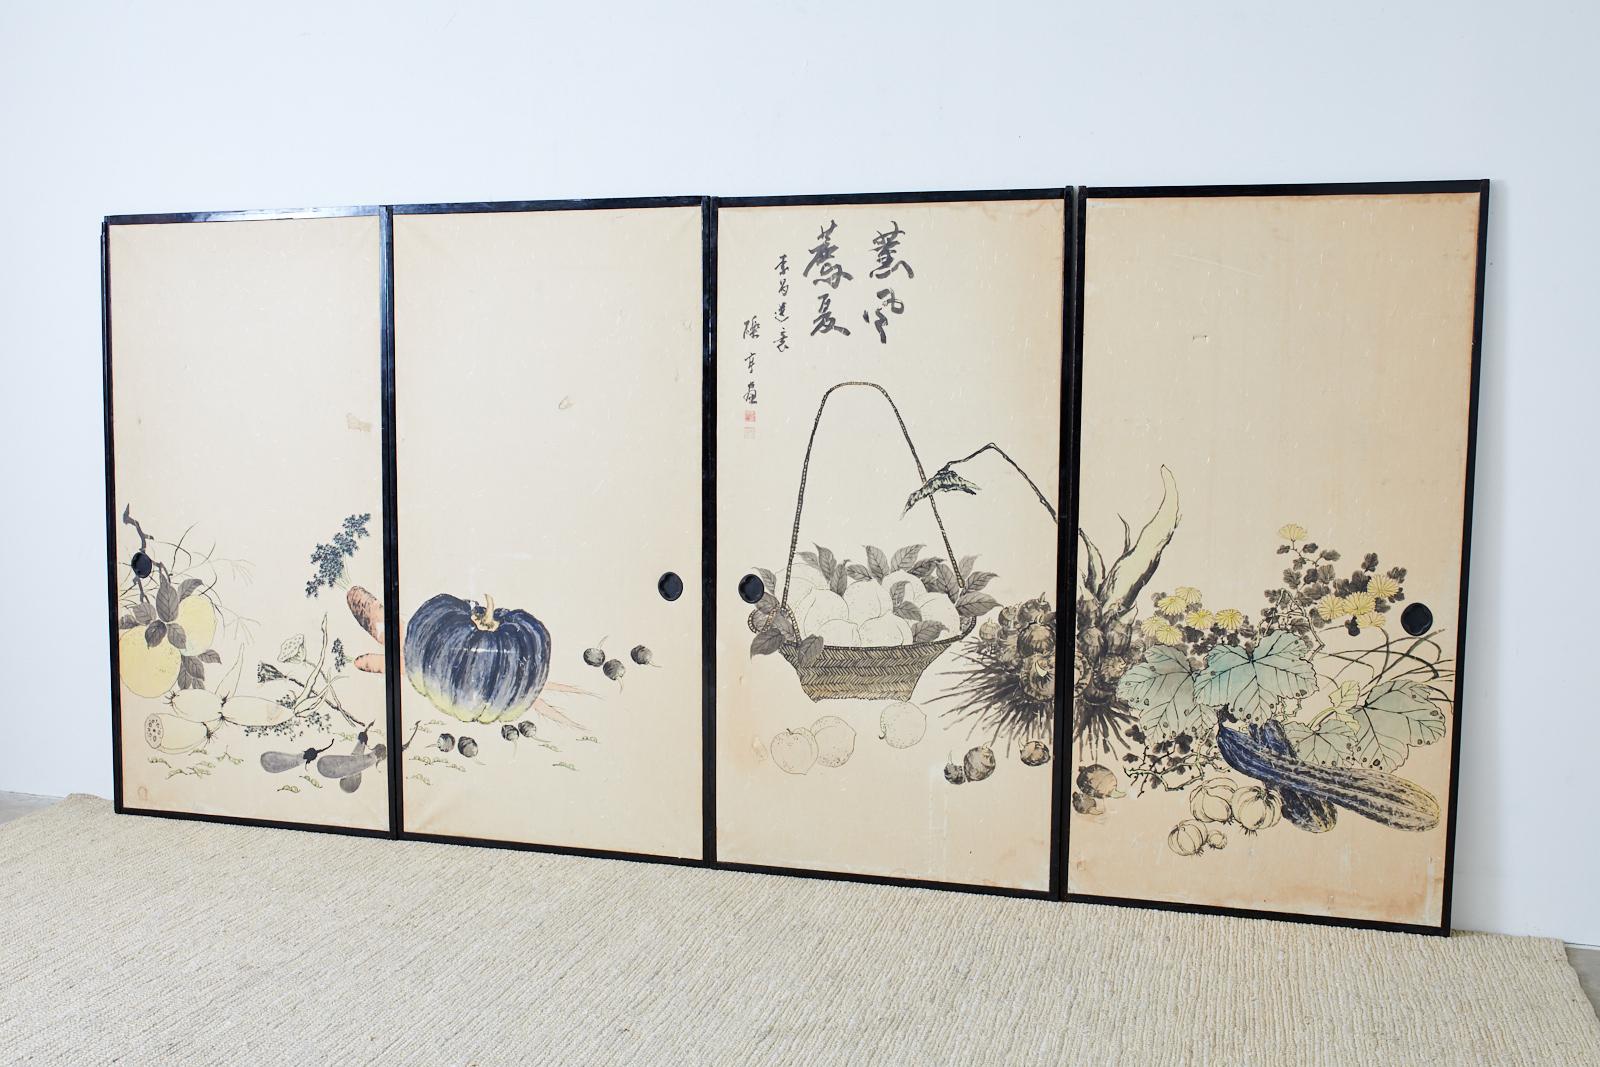 Rare set of four Japanese Showa period door panels known as Fusuma in Japanese architecture. Similar to a Shoji room divider but made of an opaque material. Constructed from handcrafted mulberry paper and framed with ebonized wood. The panels are